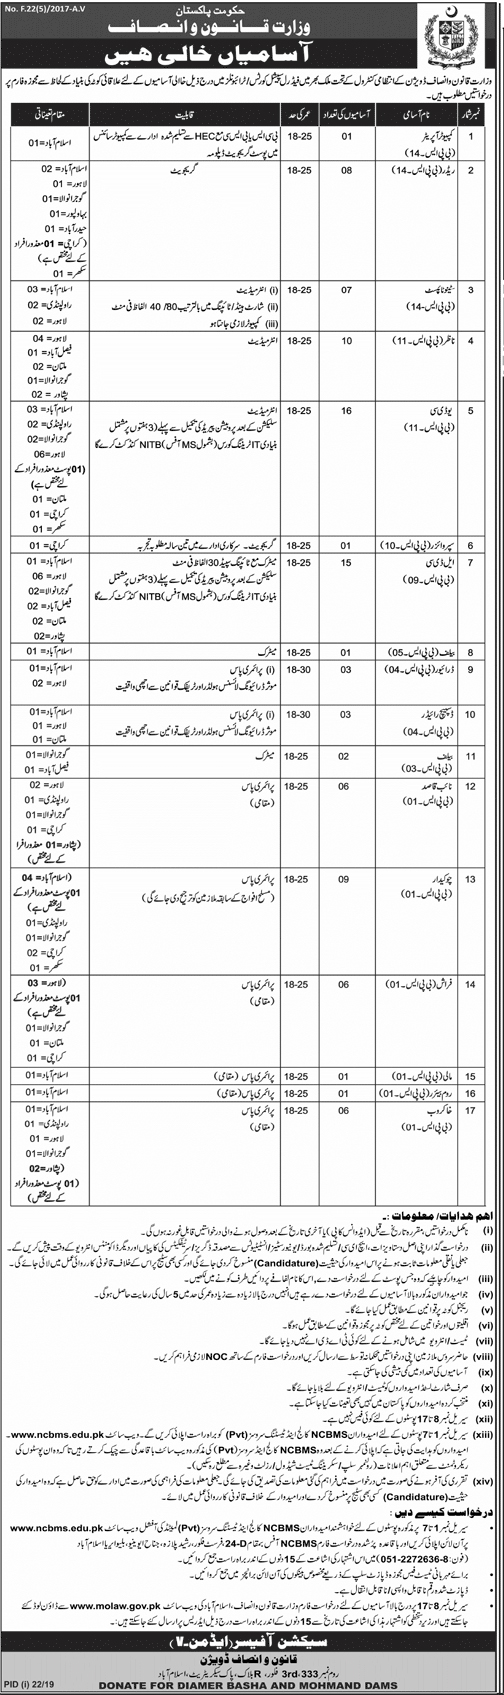 Ministry of Law Justice Govt of Pakistan jobs 2019